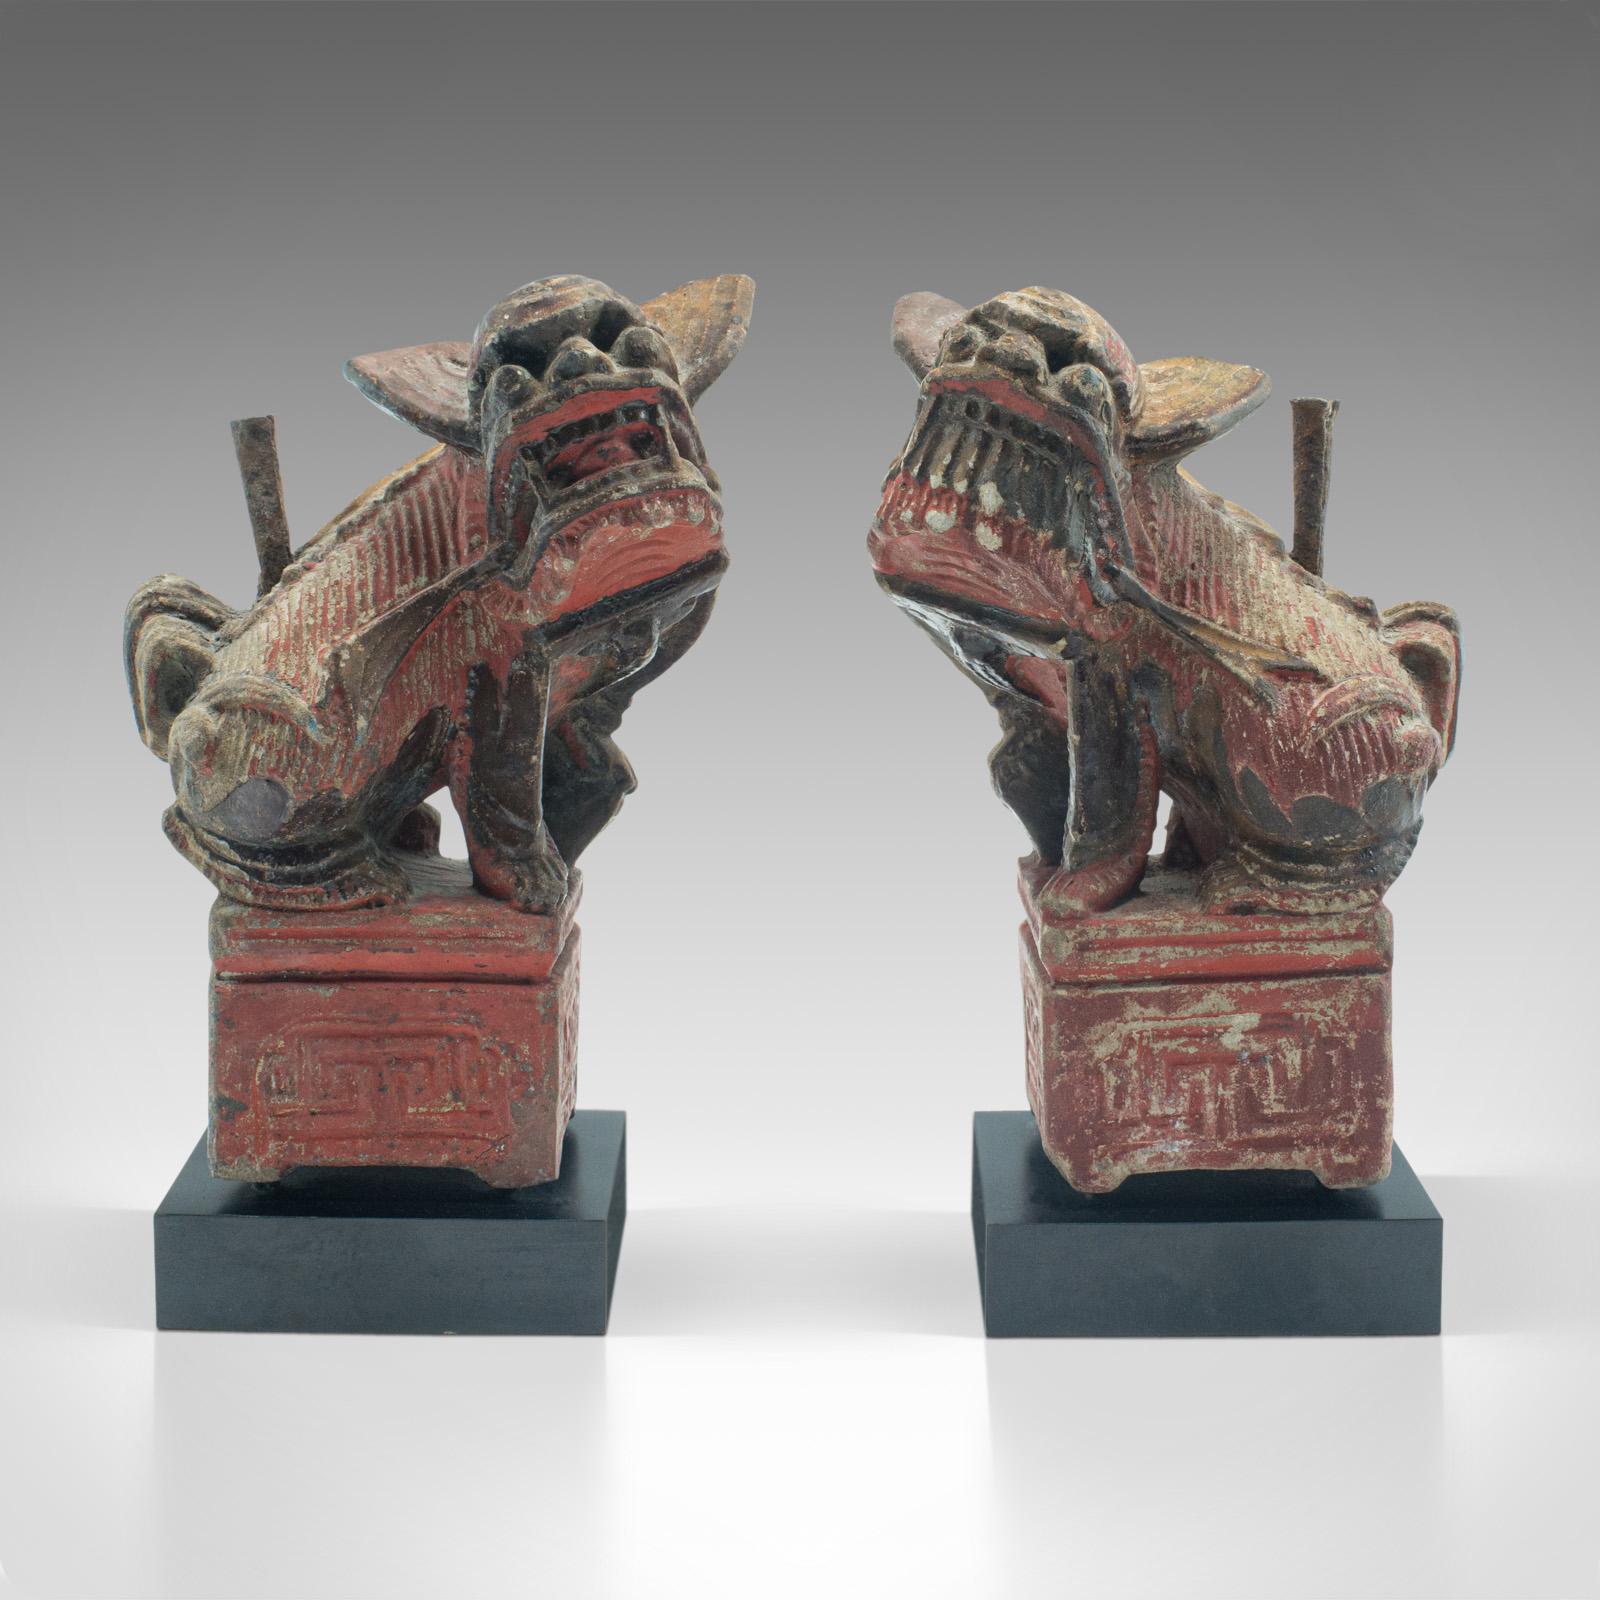 This is a pair of antique incense burners. An Oriental, decorative stone censer or guardian lion bookends, dating to the late Victorian period, circa 1900.

Fascinating guardian lion figures with incense burning chimneys
Displays a desirable aged